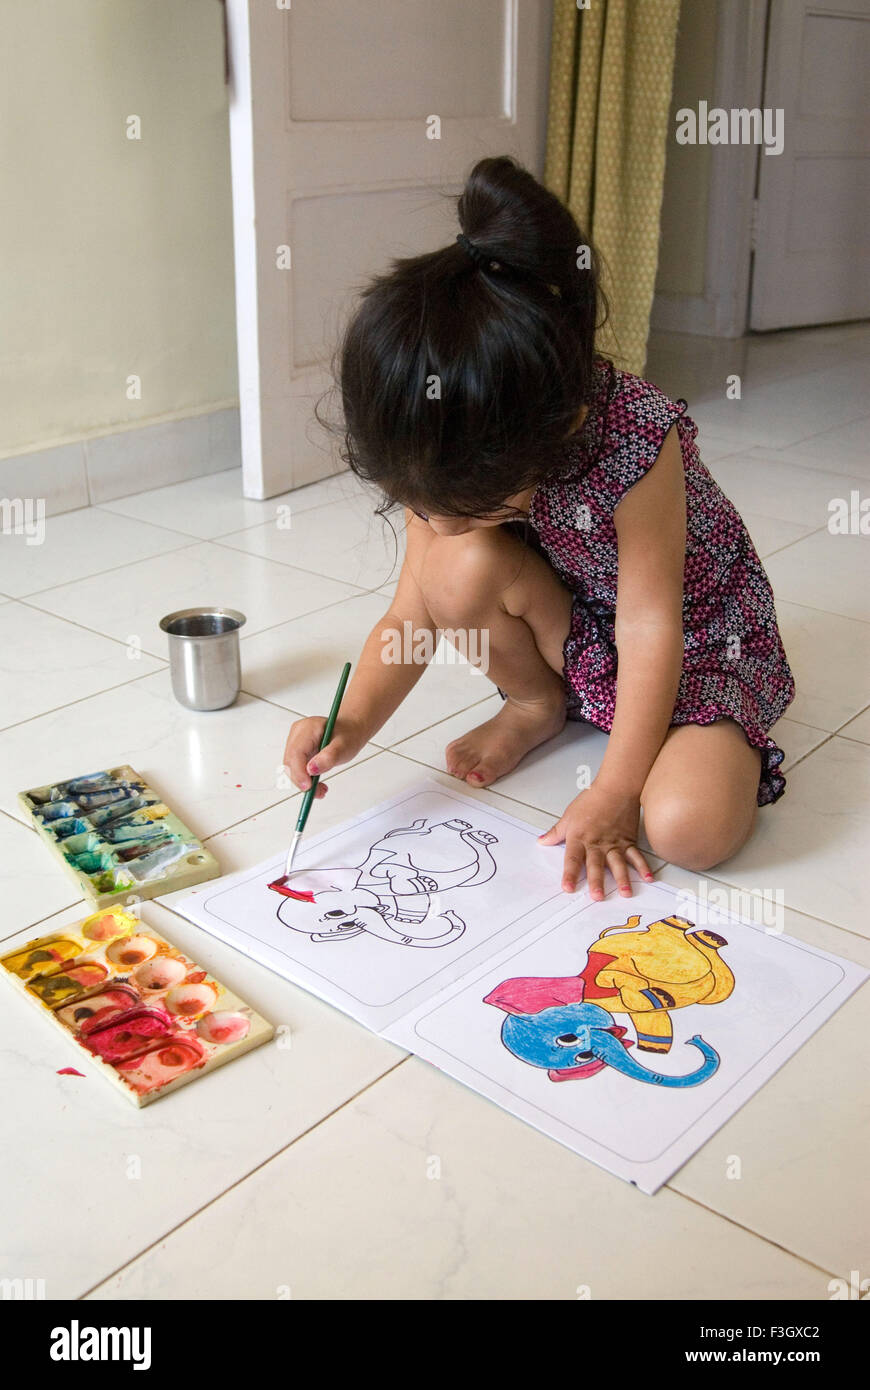 Four years old girl filling watercolour with brush in sketch MR#556 Stock Photo